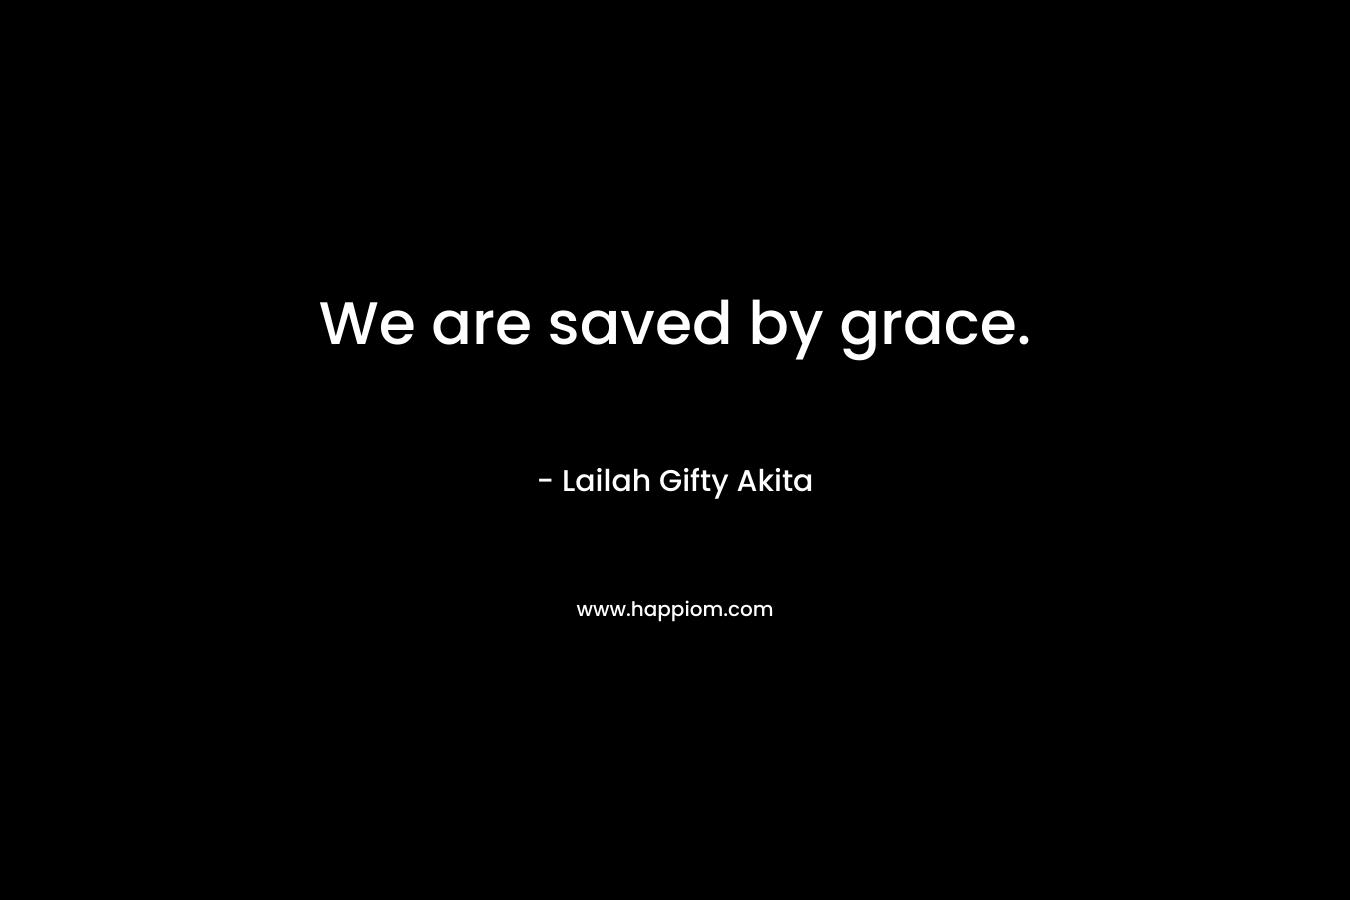 We are saved by grace.